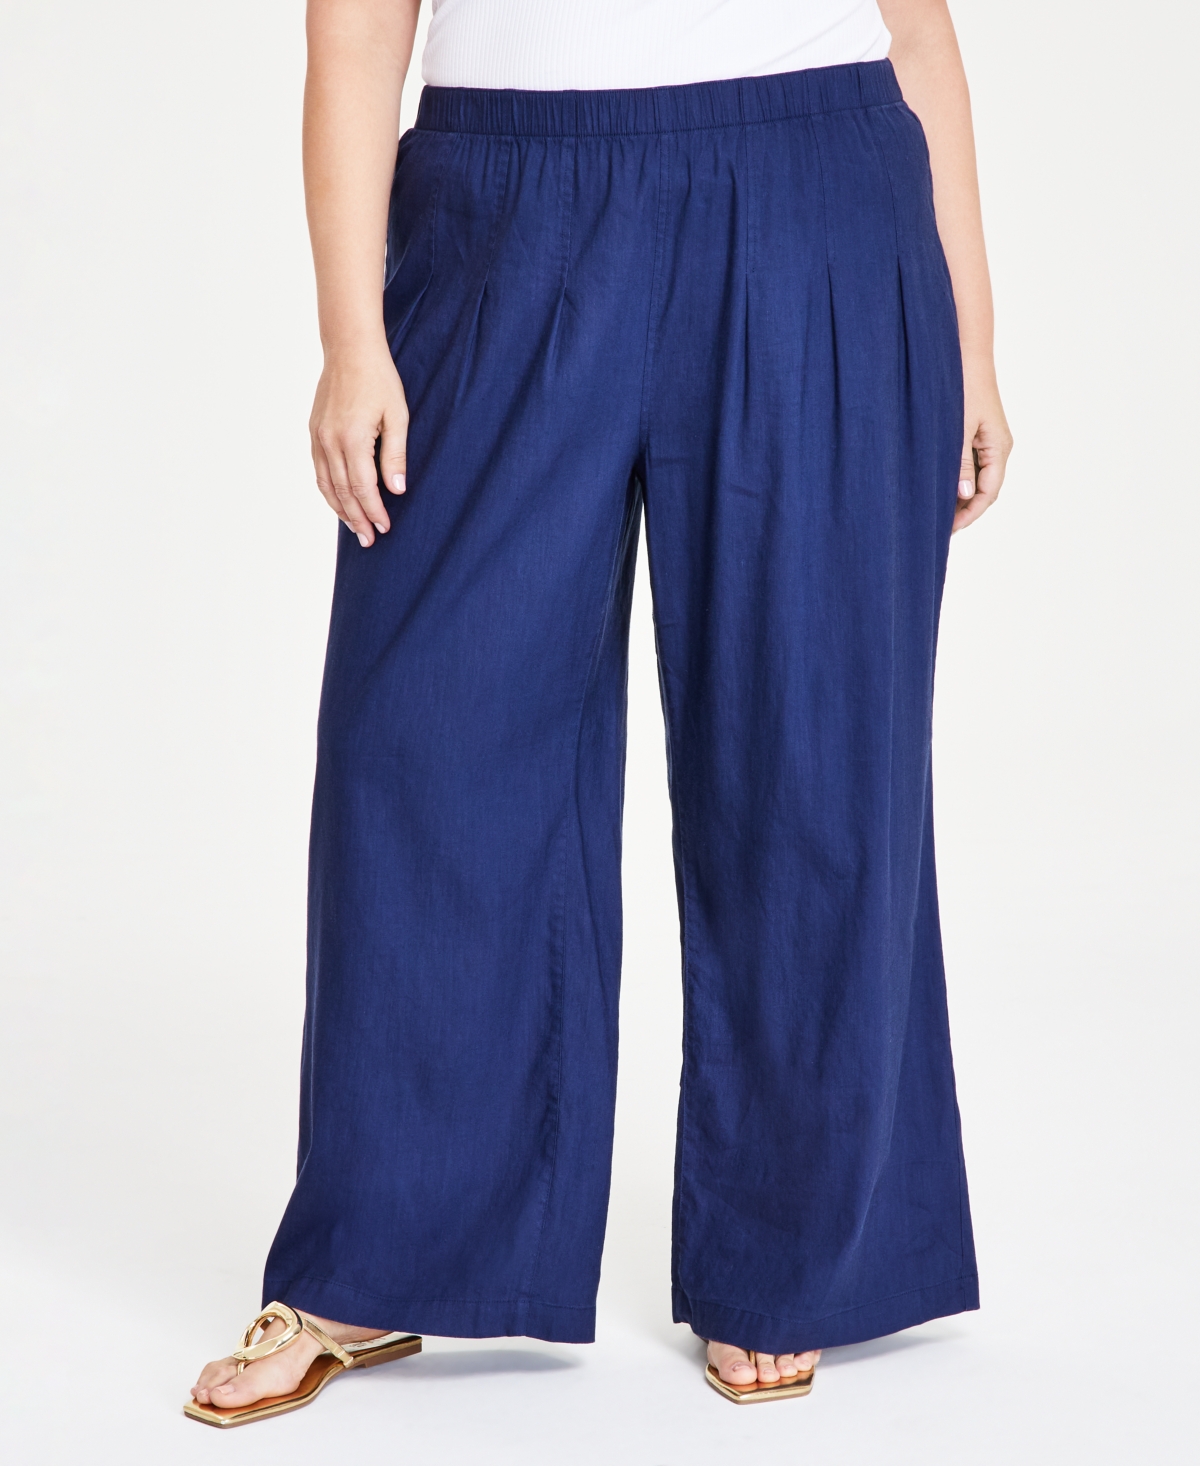 Plus Size Mid-Rise Pull-On Capri Pants, Created for Macy's